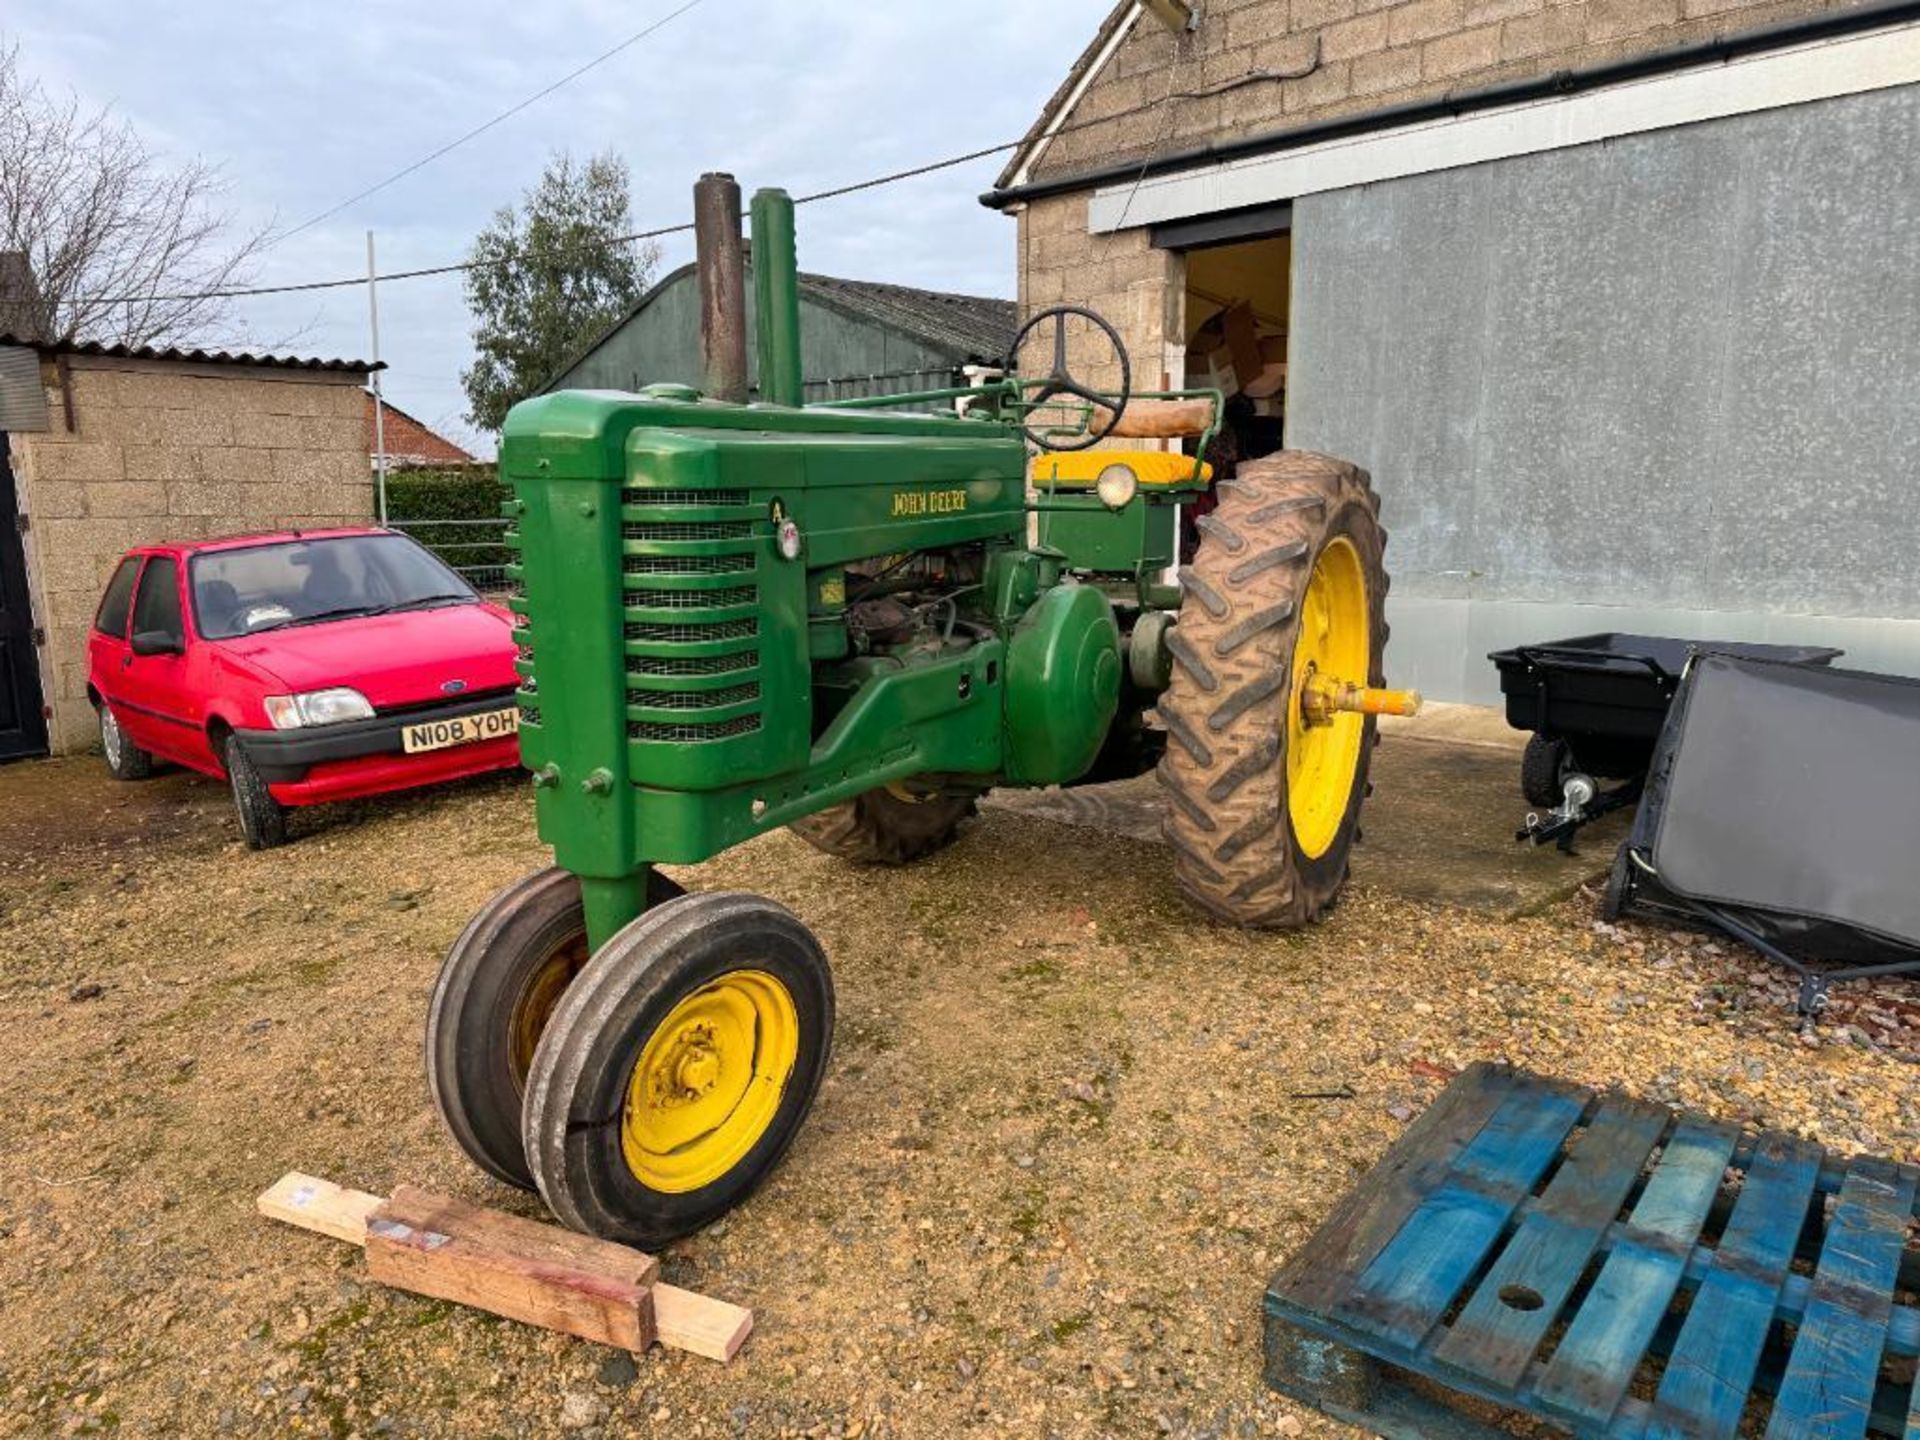 1948 John Deere Model A row crop tractor with side belt pulley, rear PTO and drawbar and twin front - Image 2 of 15